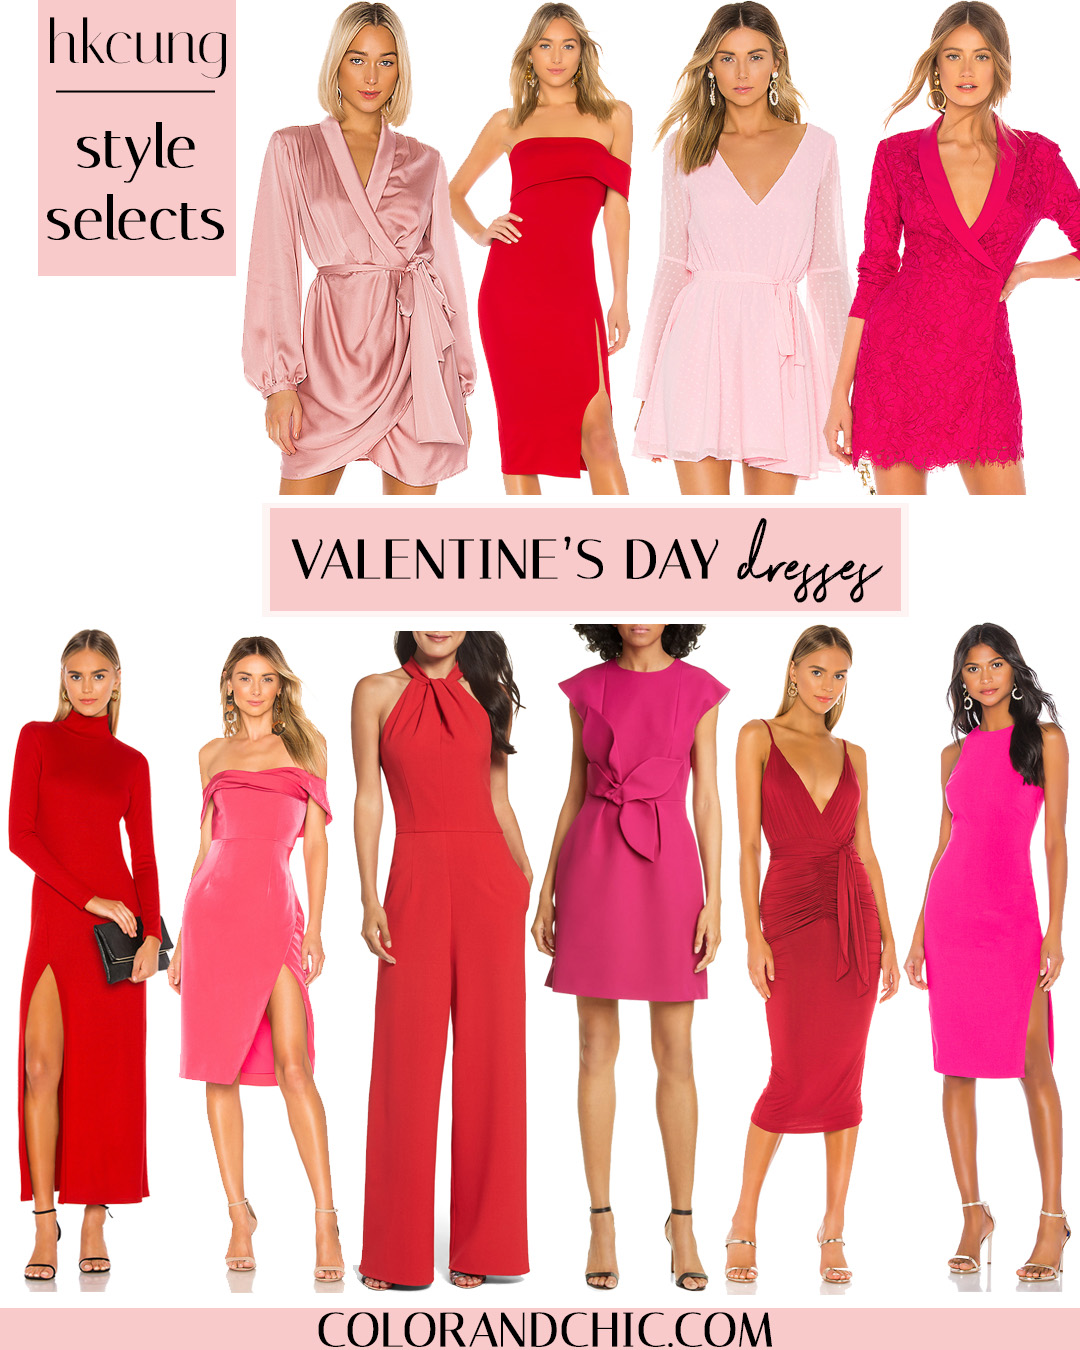 Valentine's Day dresses and outfits